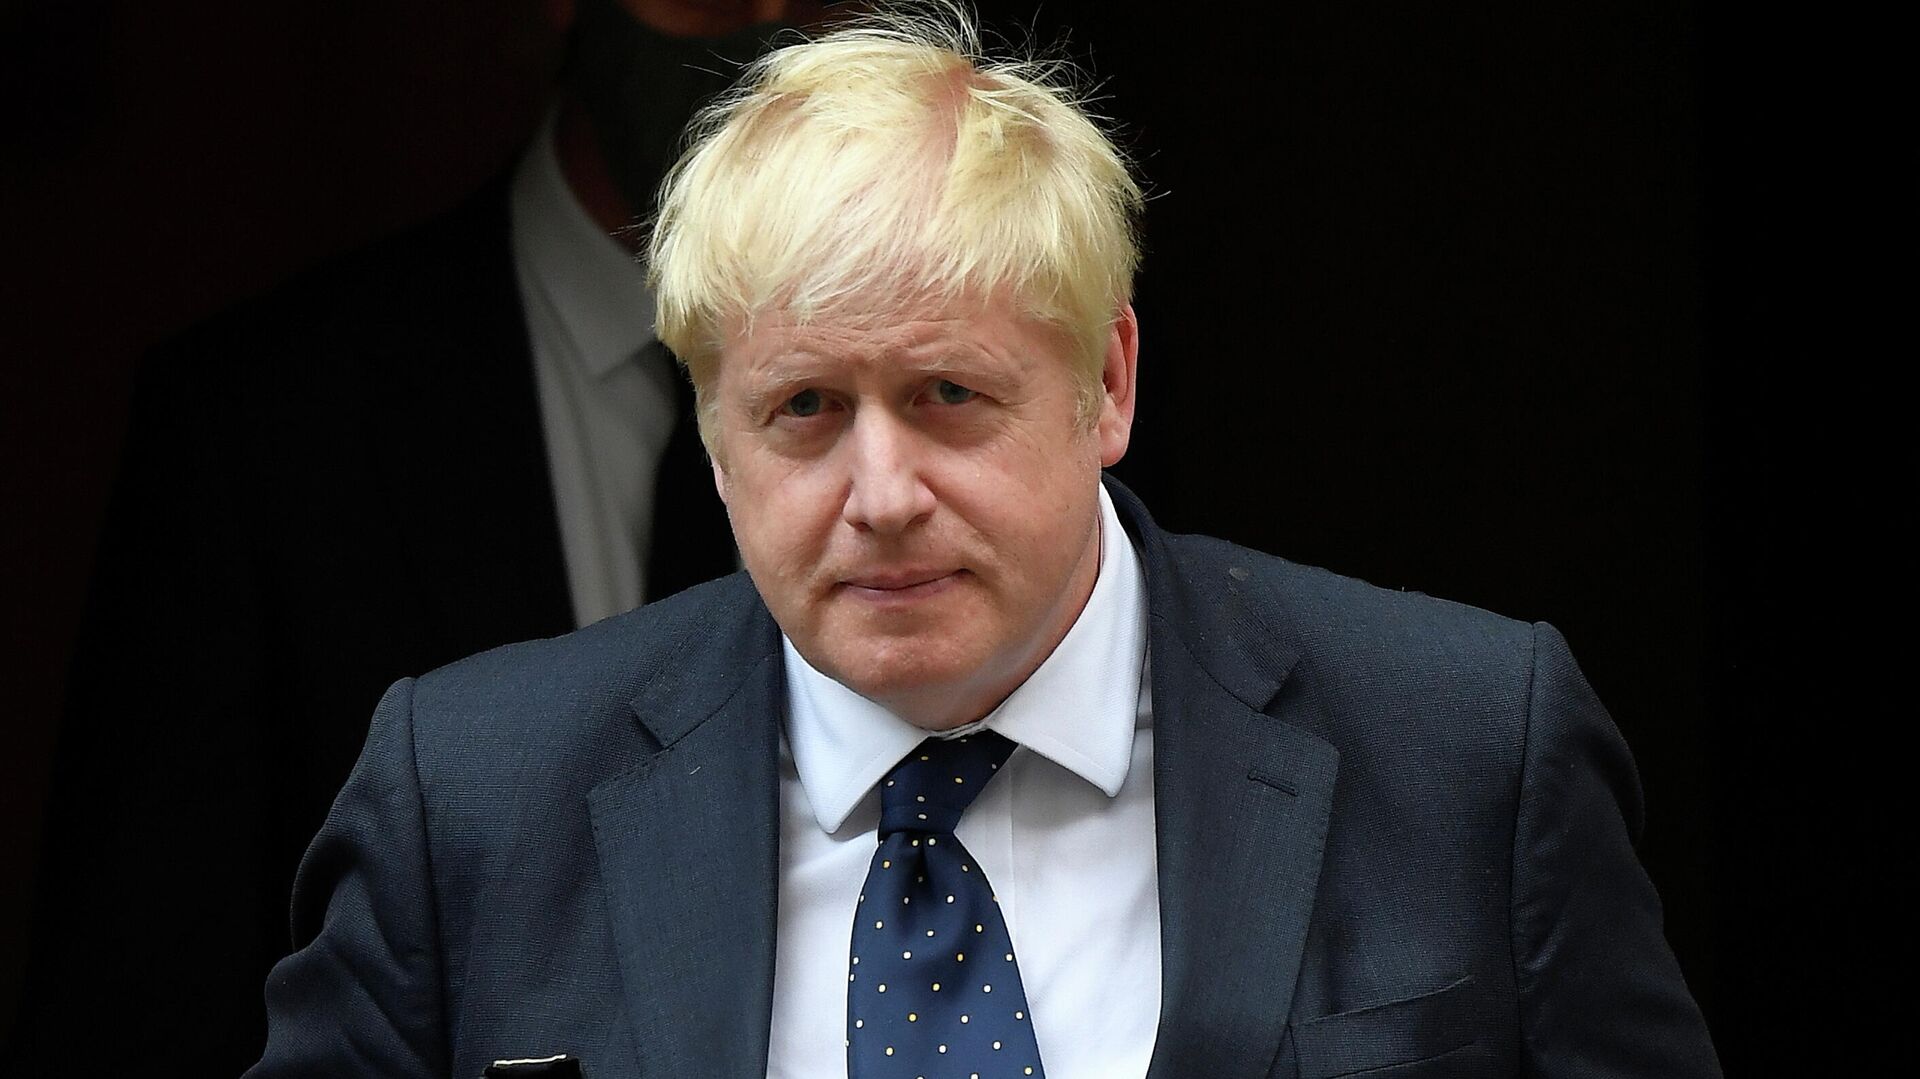 Britain's Prime Minister Boris Johnson leaves Downing Street, ahead of addressing lawmakers about Britain's withdrawal from Afghanistan, in London, Britain, September 6, 2021 - Sputnik International, 1920, 08.09.2021